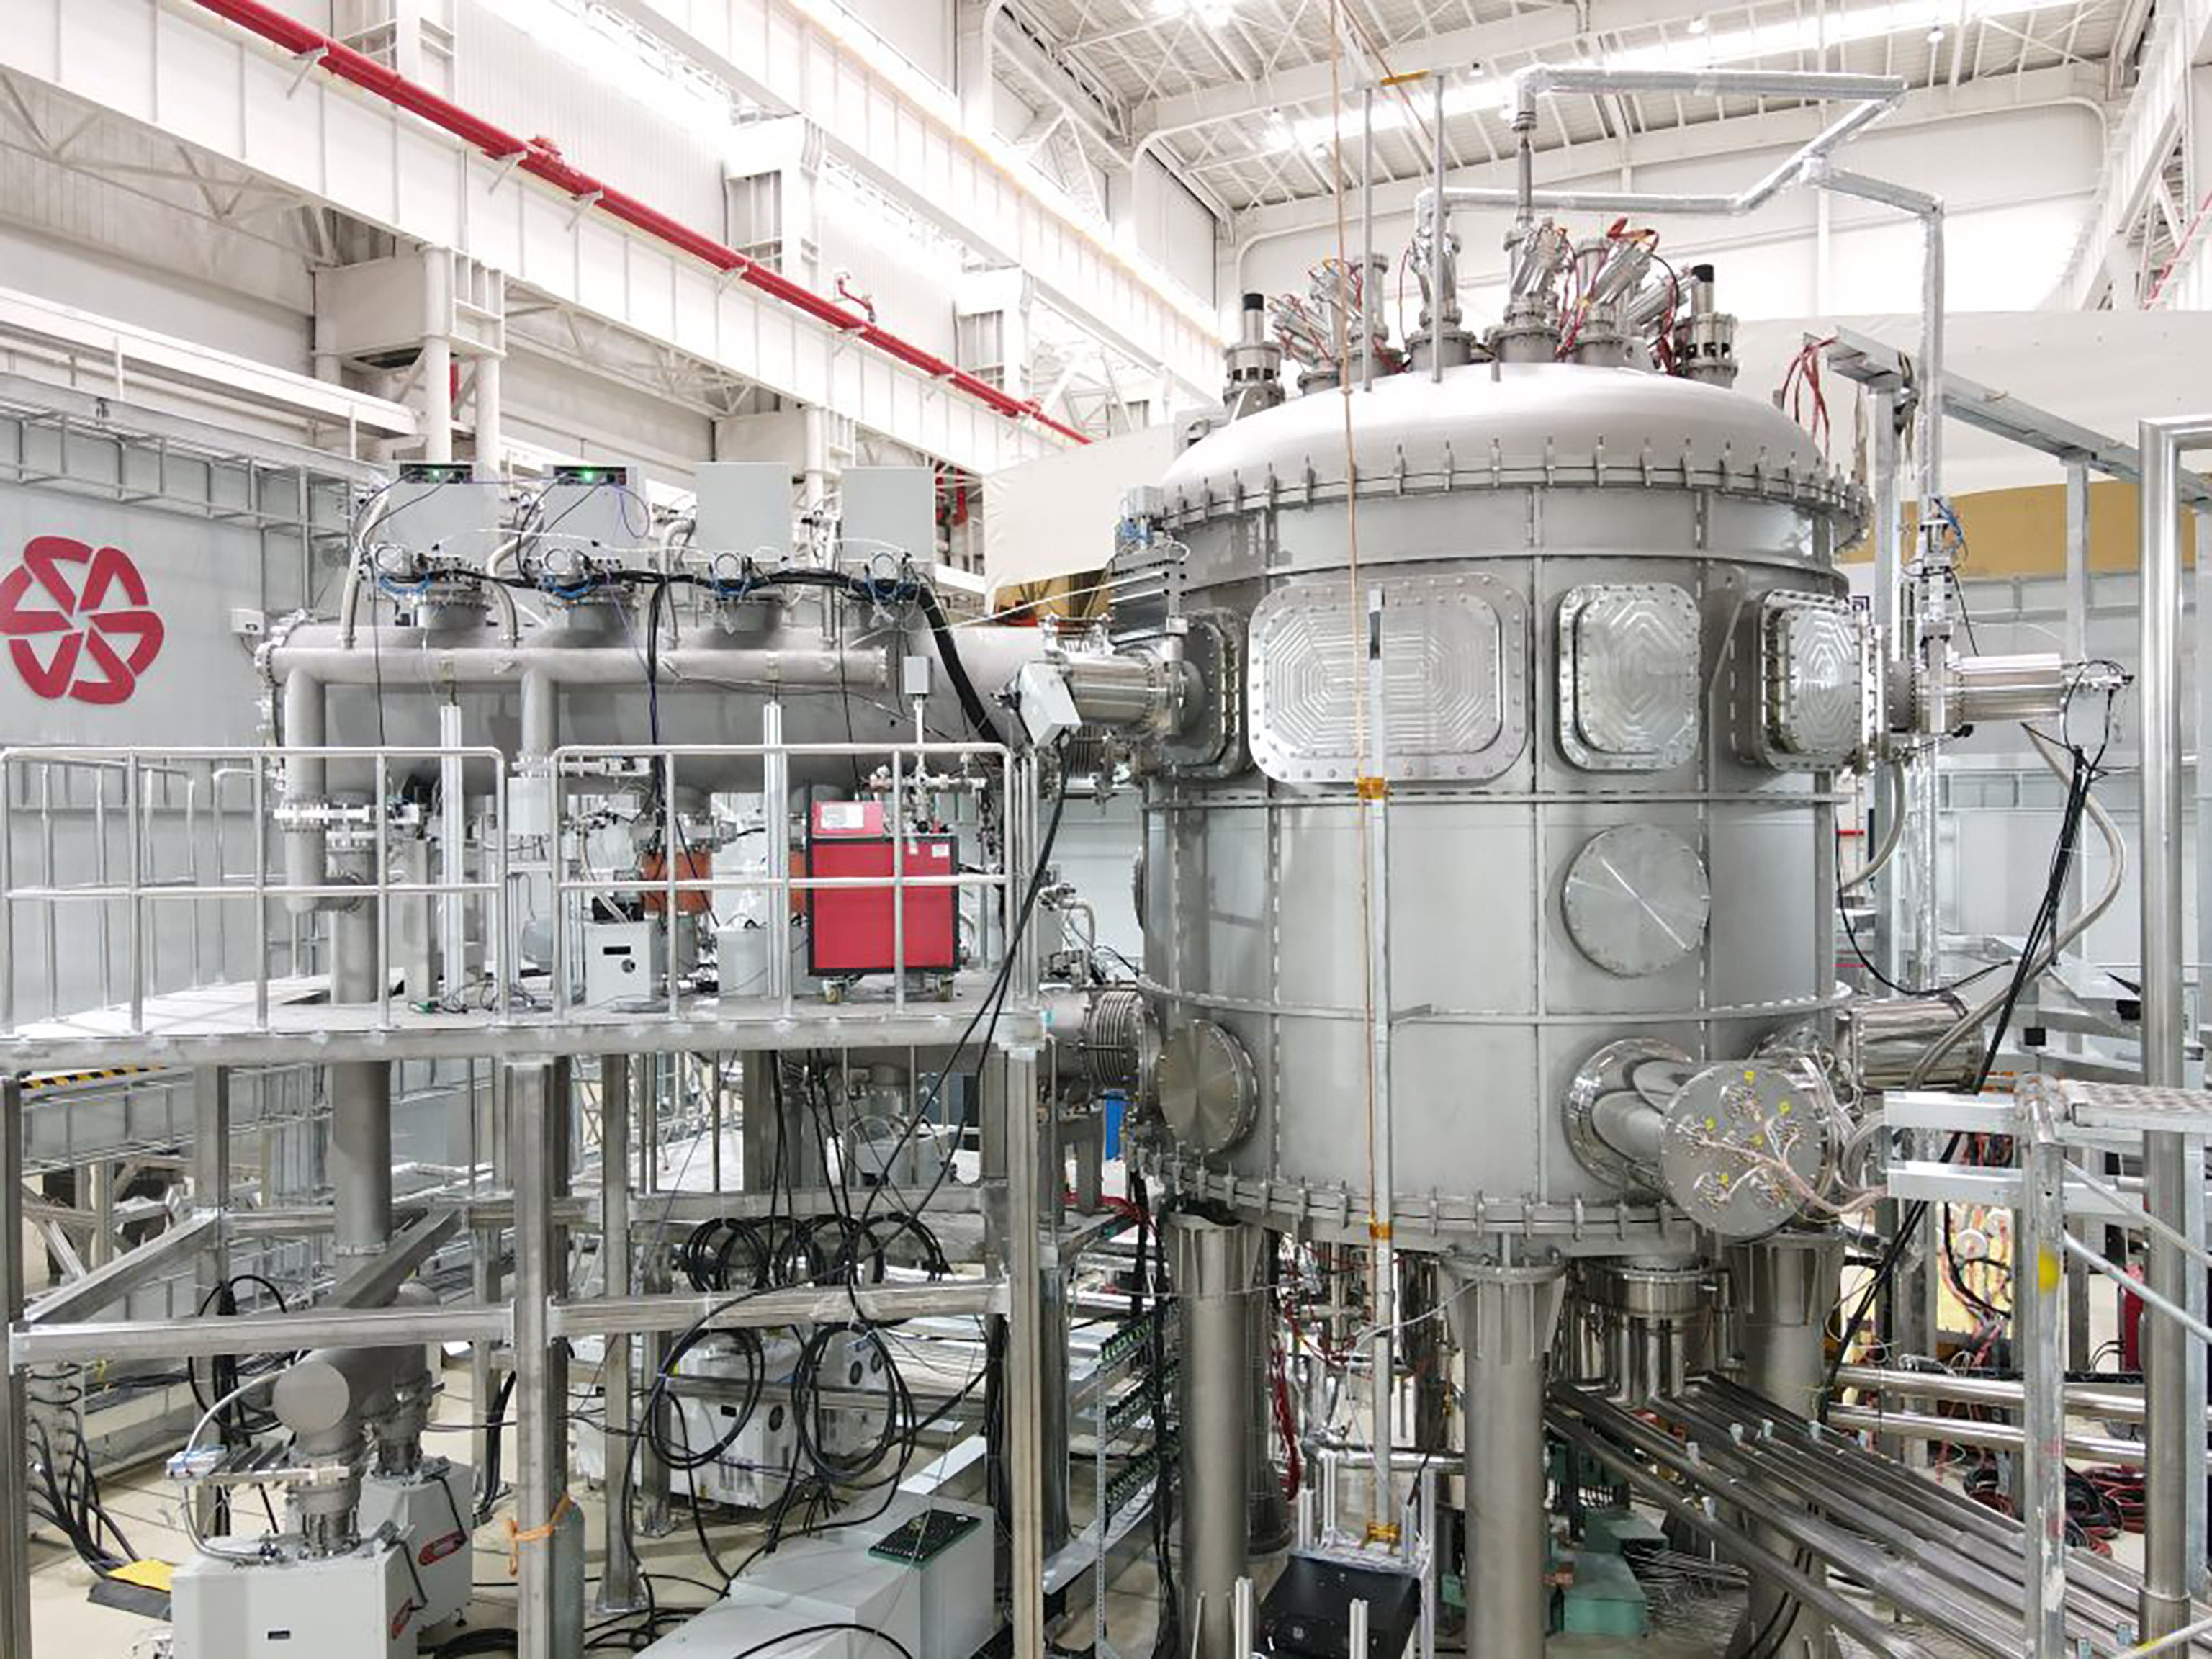 HH70 is the world’s first full high-temperature superconducting tokamak device and also the world’s first full superconducting tokamak device developed and built by Energy Singularity. Photo: Energy Singularity